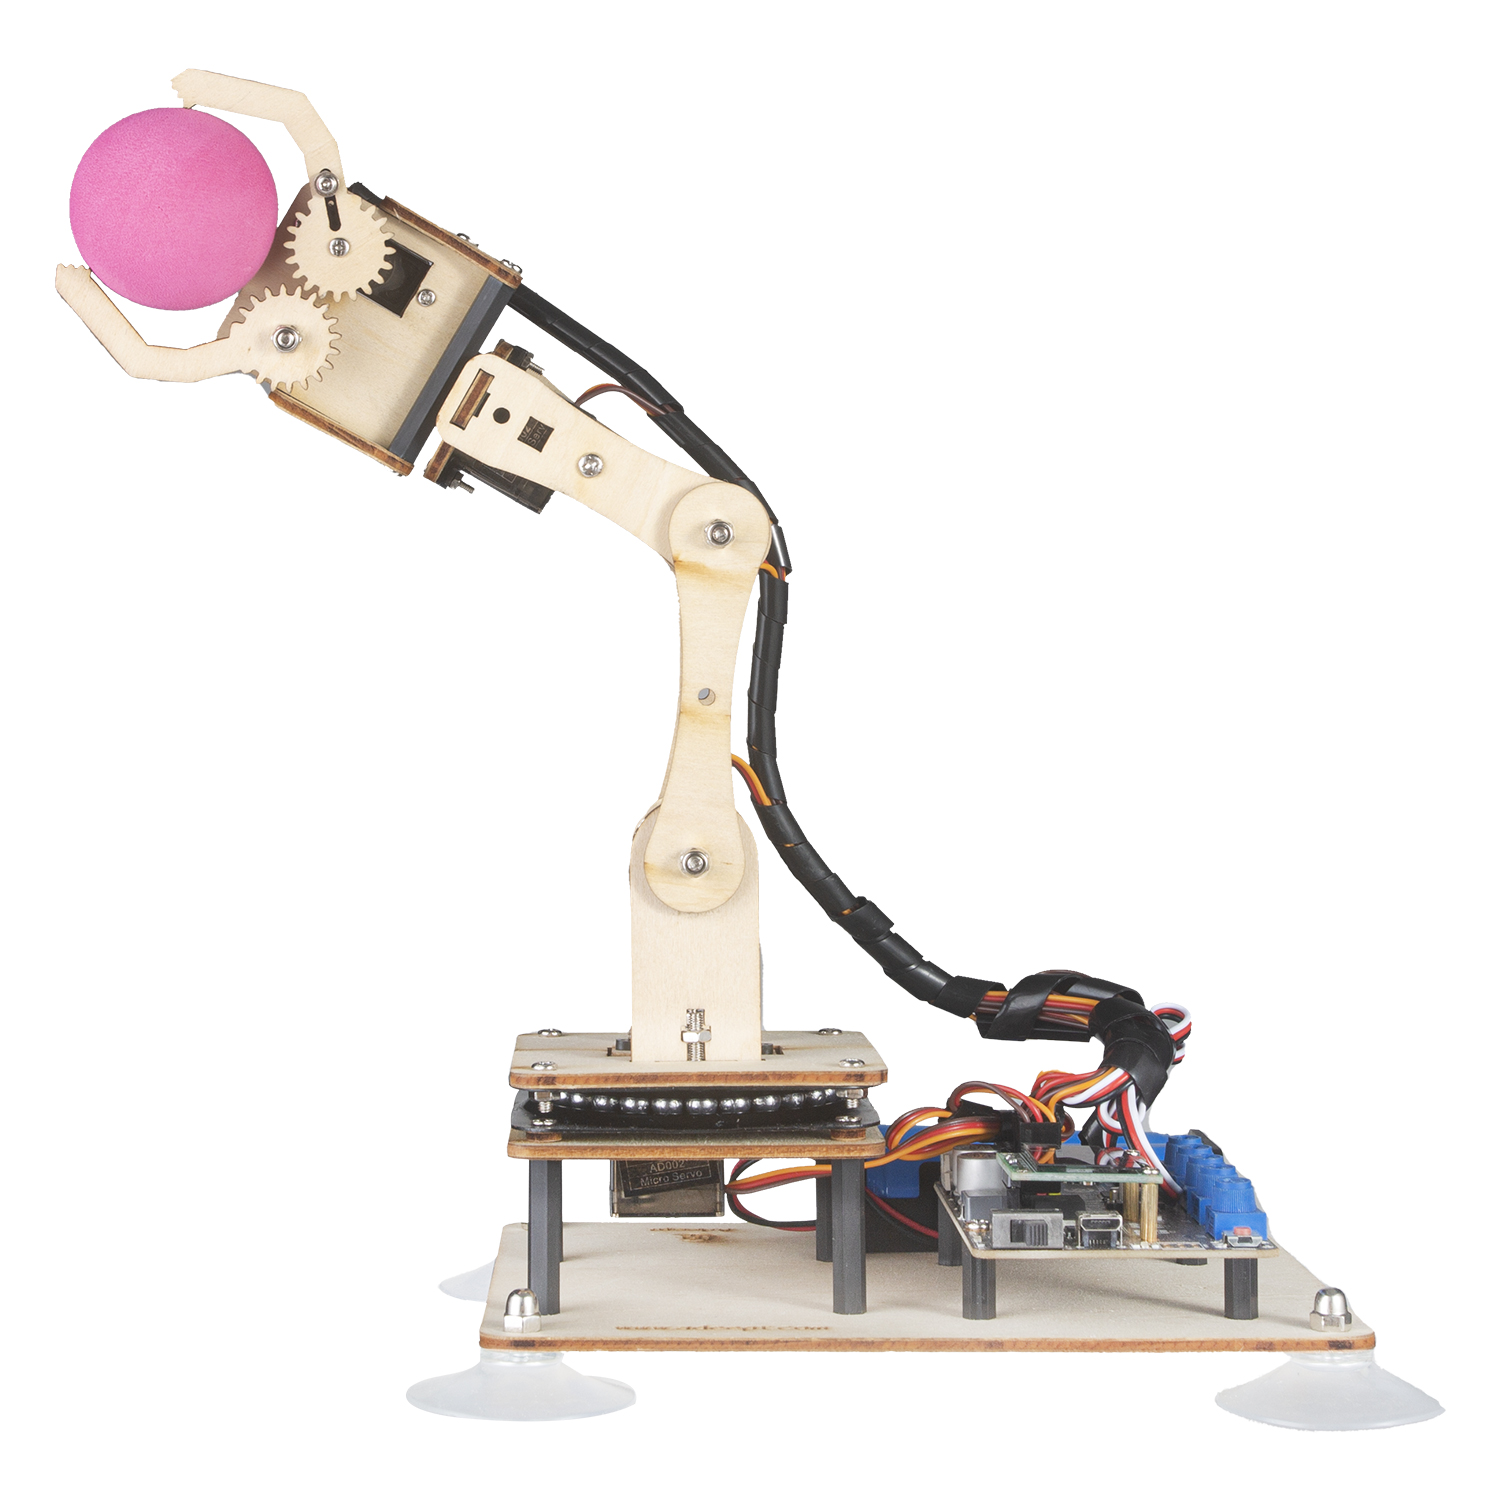 Adeept 5-DOF Wooden Robot Arm Kit Compatible with Arduino IDE